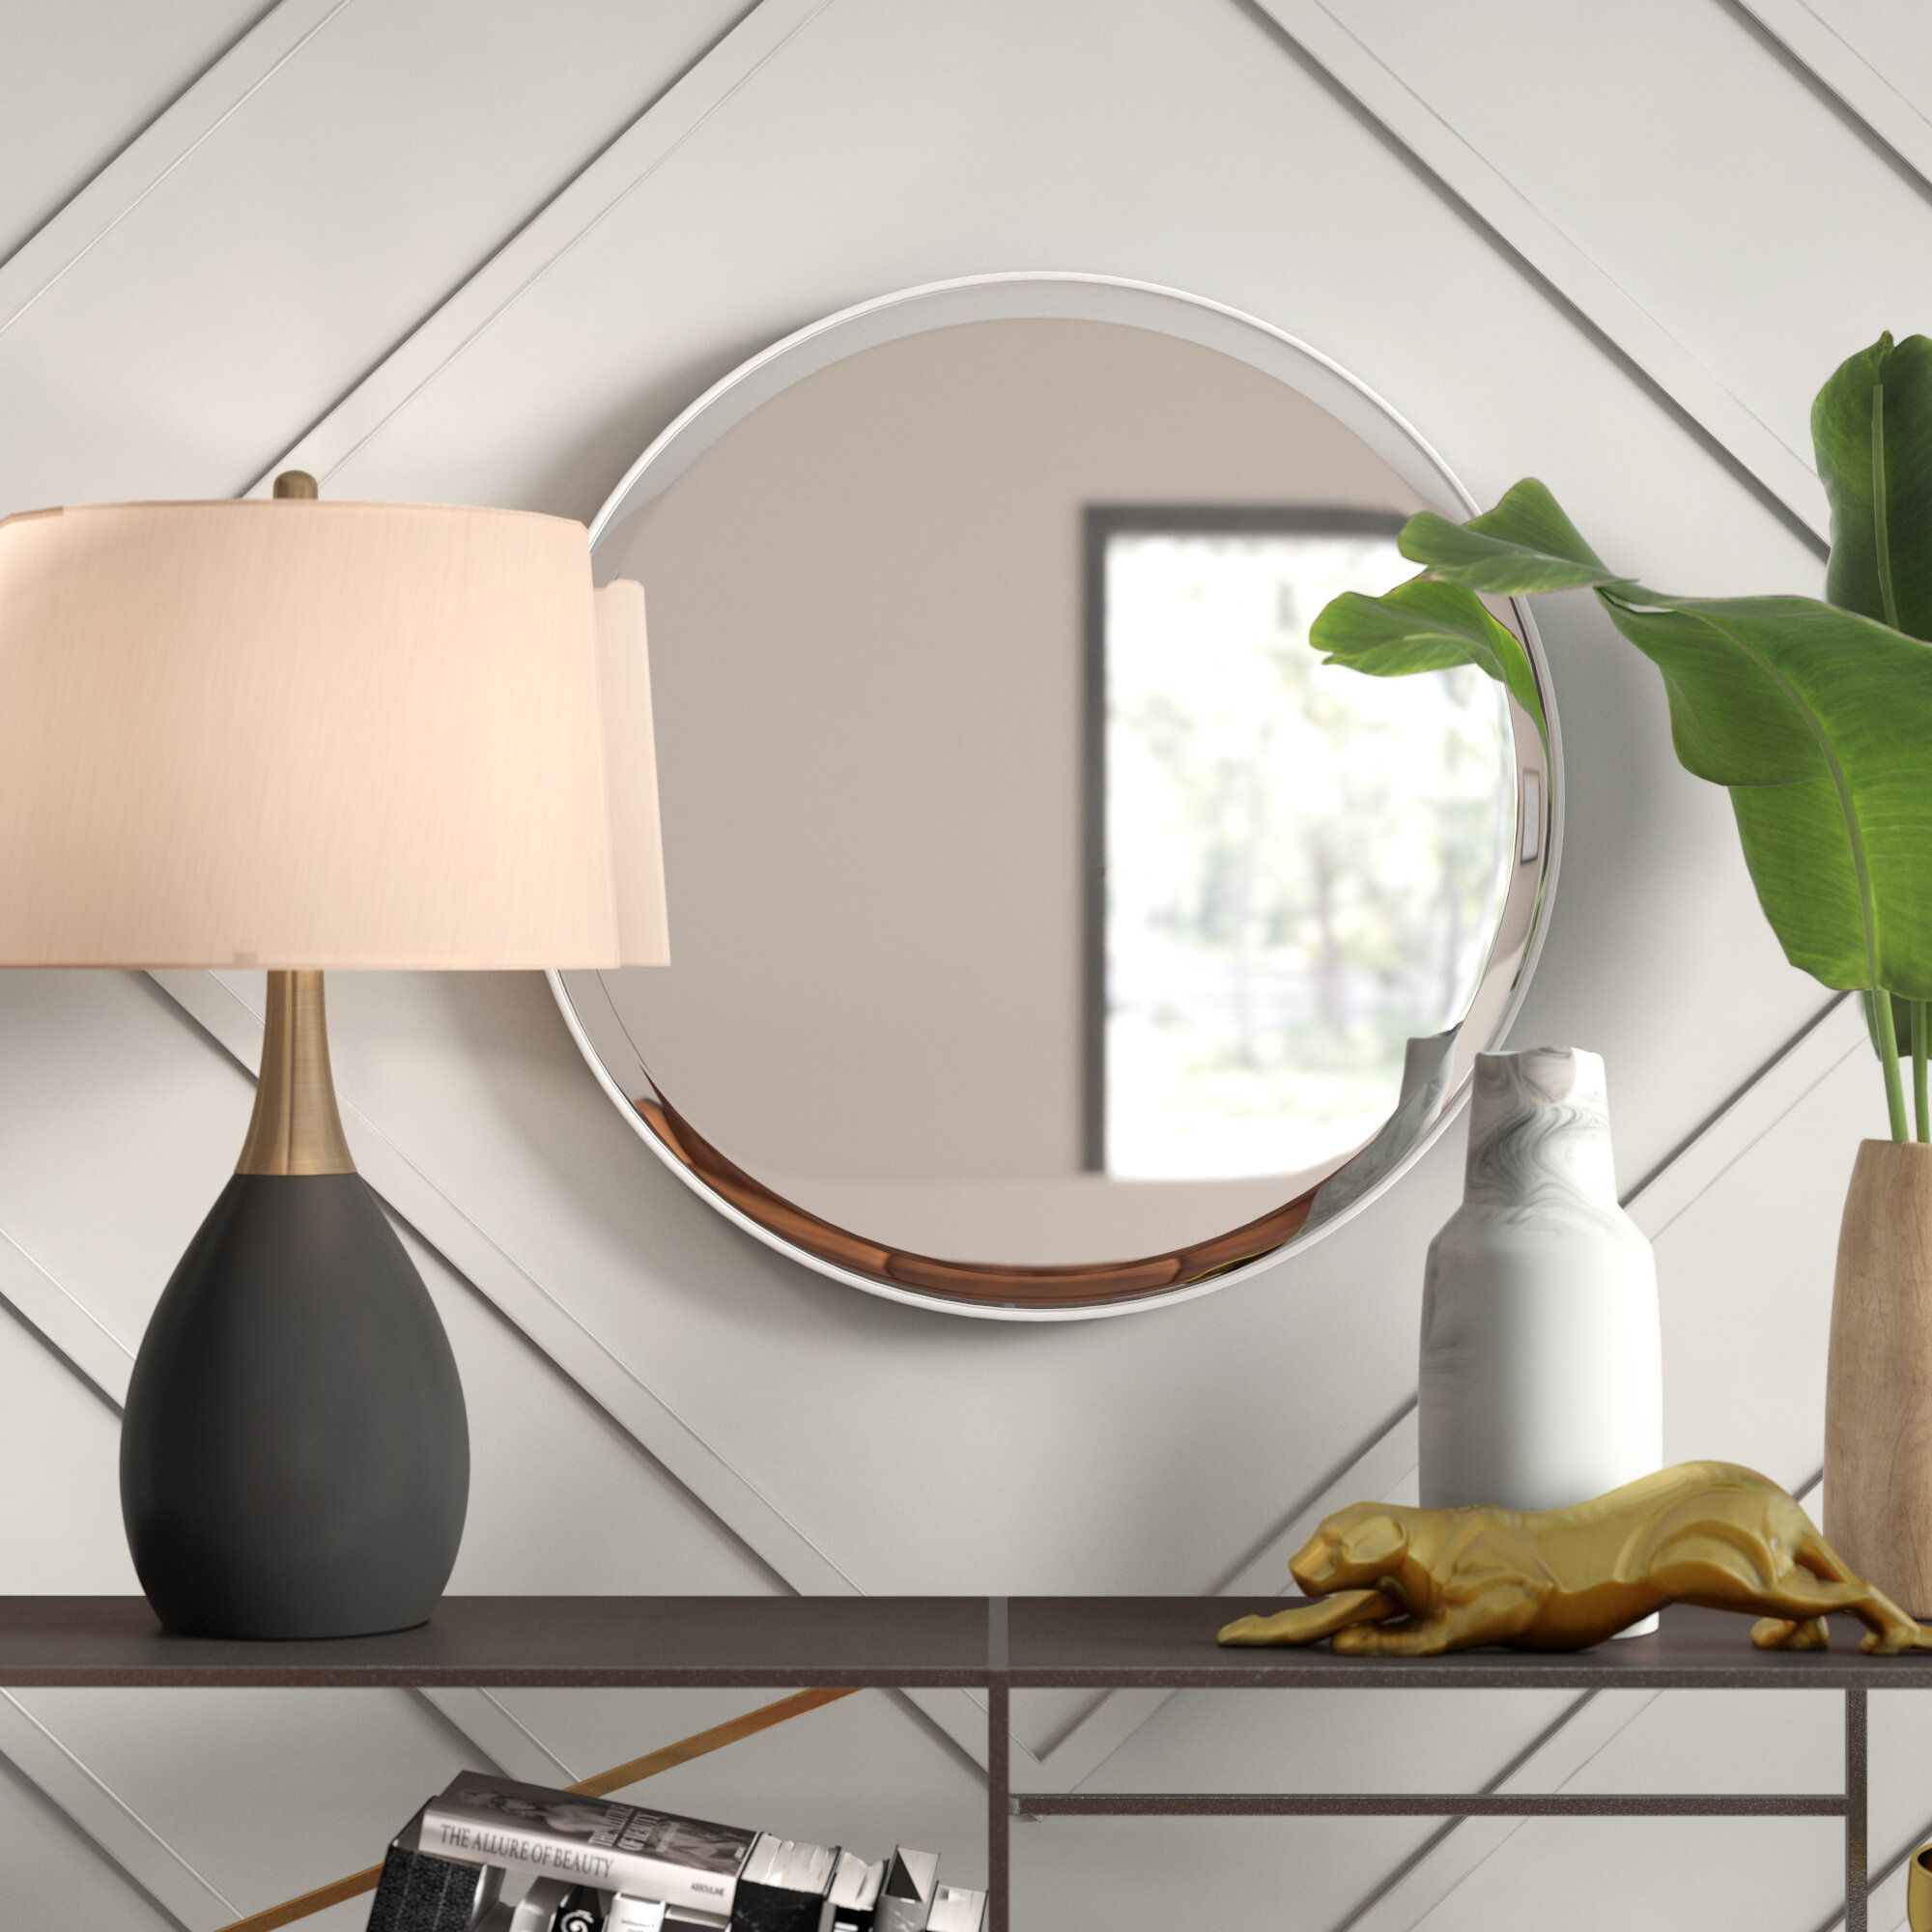 Contemporary Wall Mirrors: Reflect Your Style With A Modern Touch